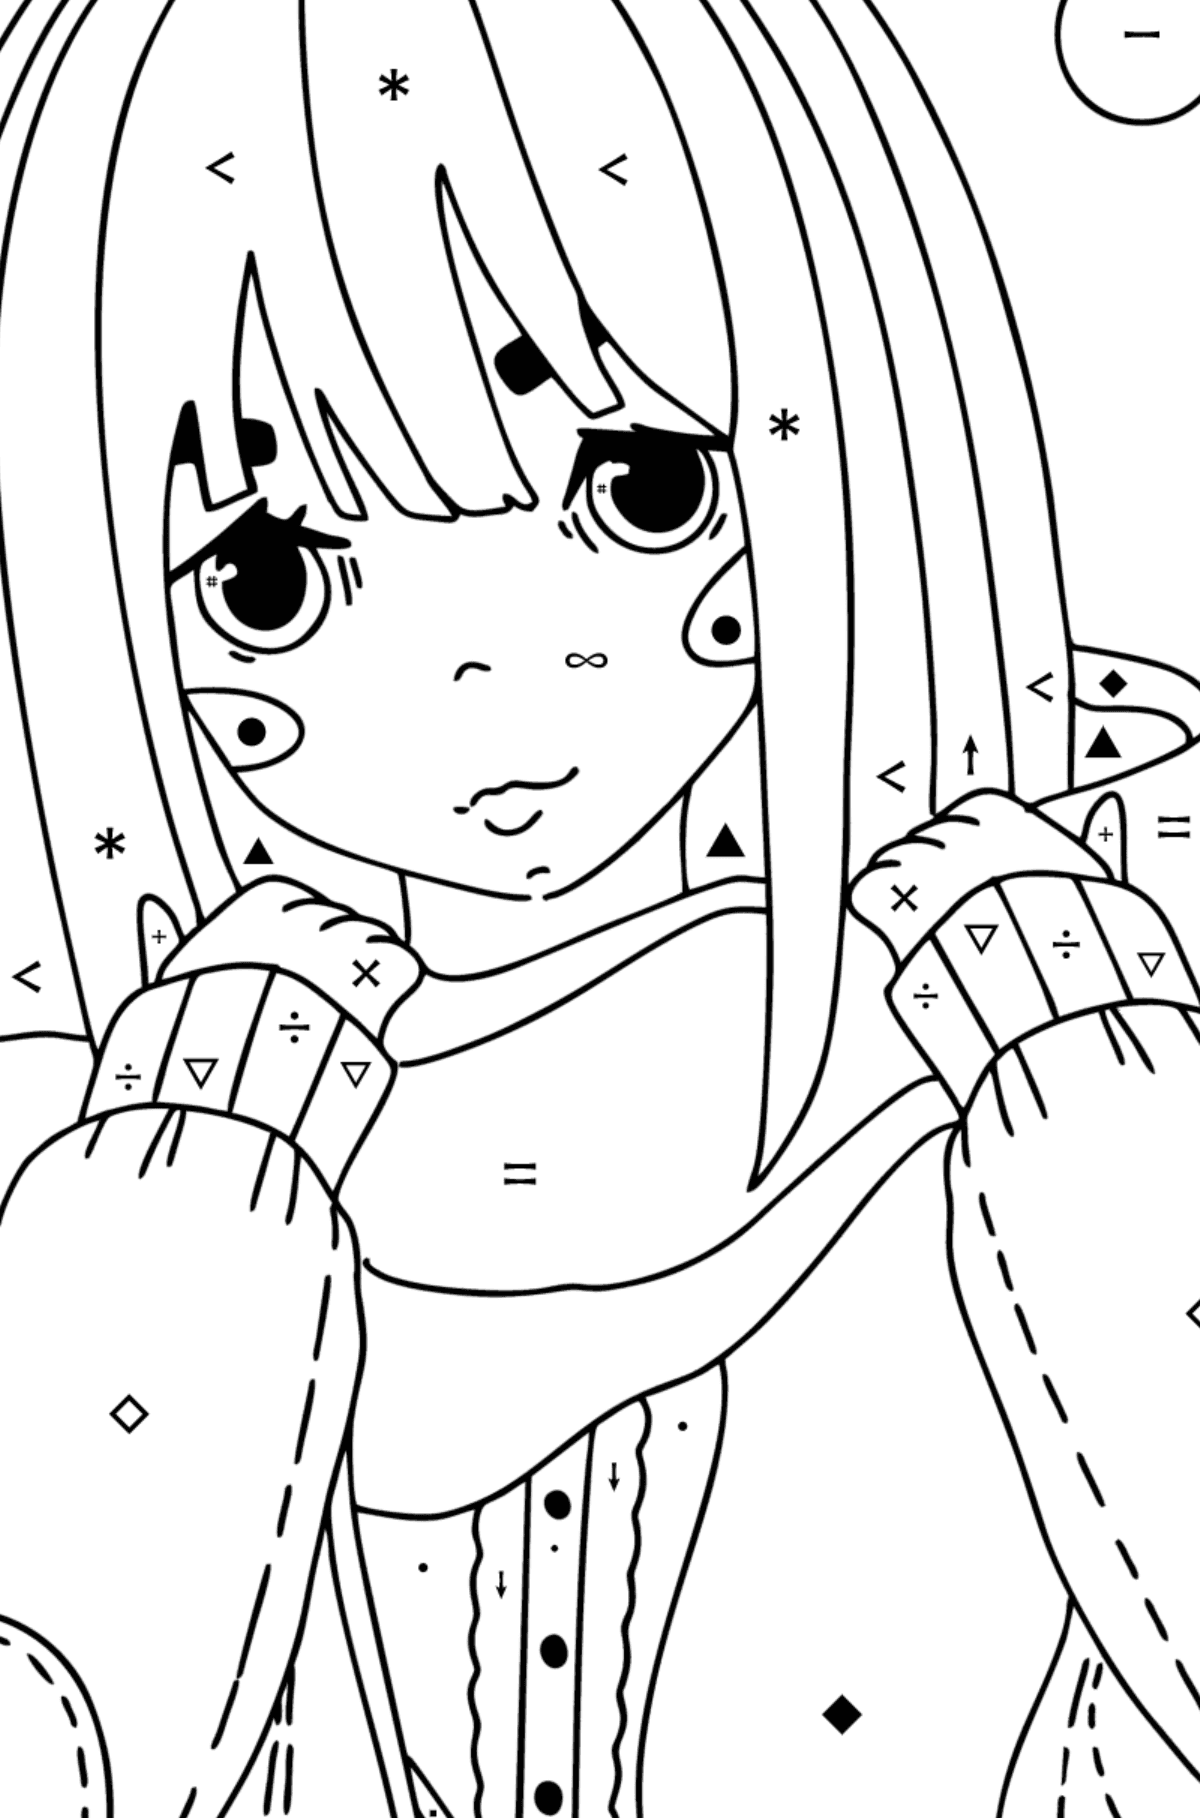 Cool anime girl coloring page - Coloring by Symbols for Kids